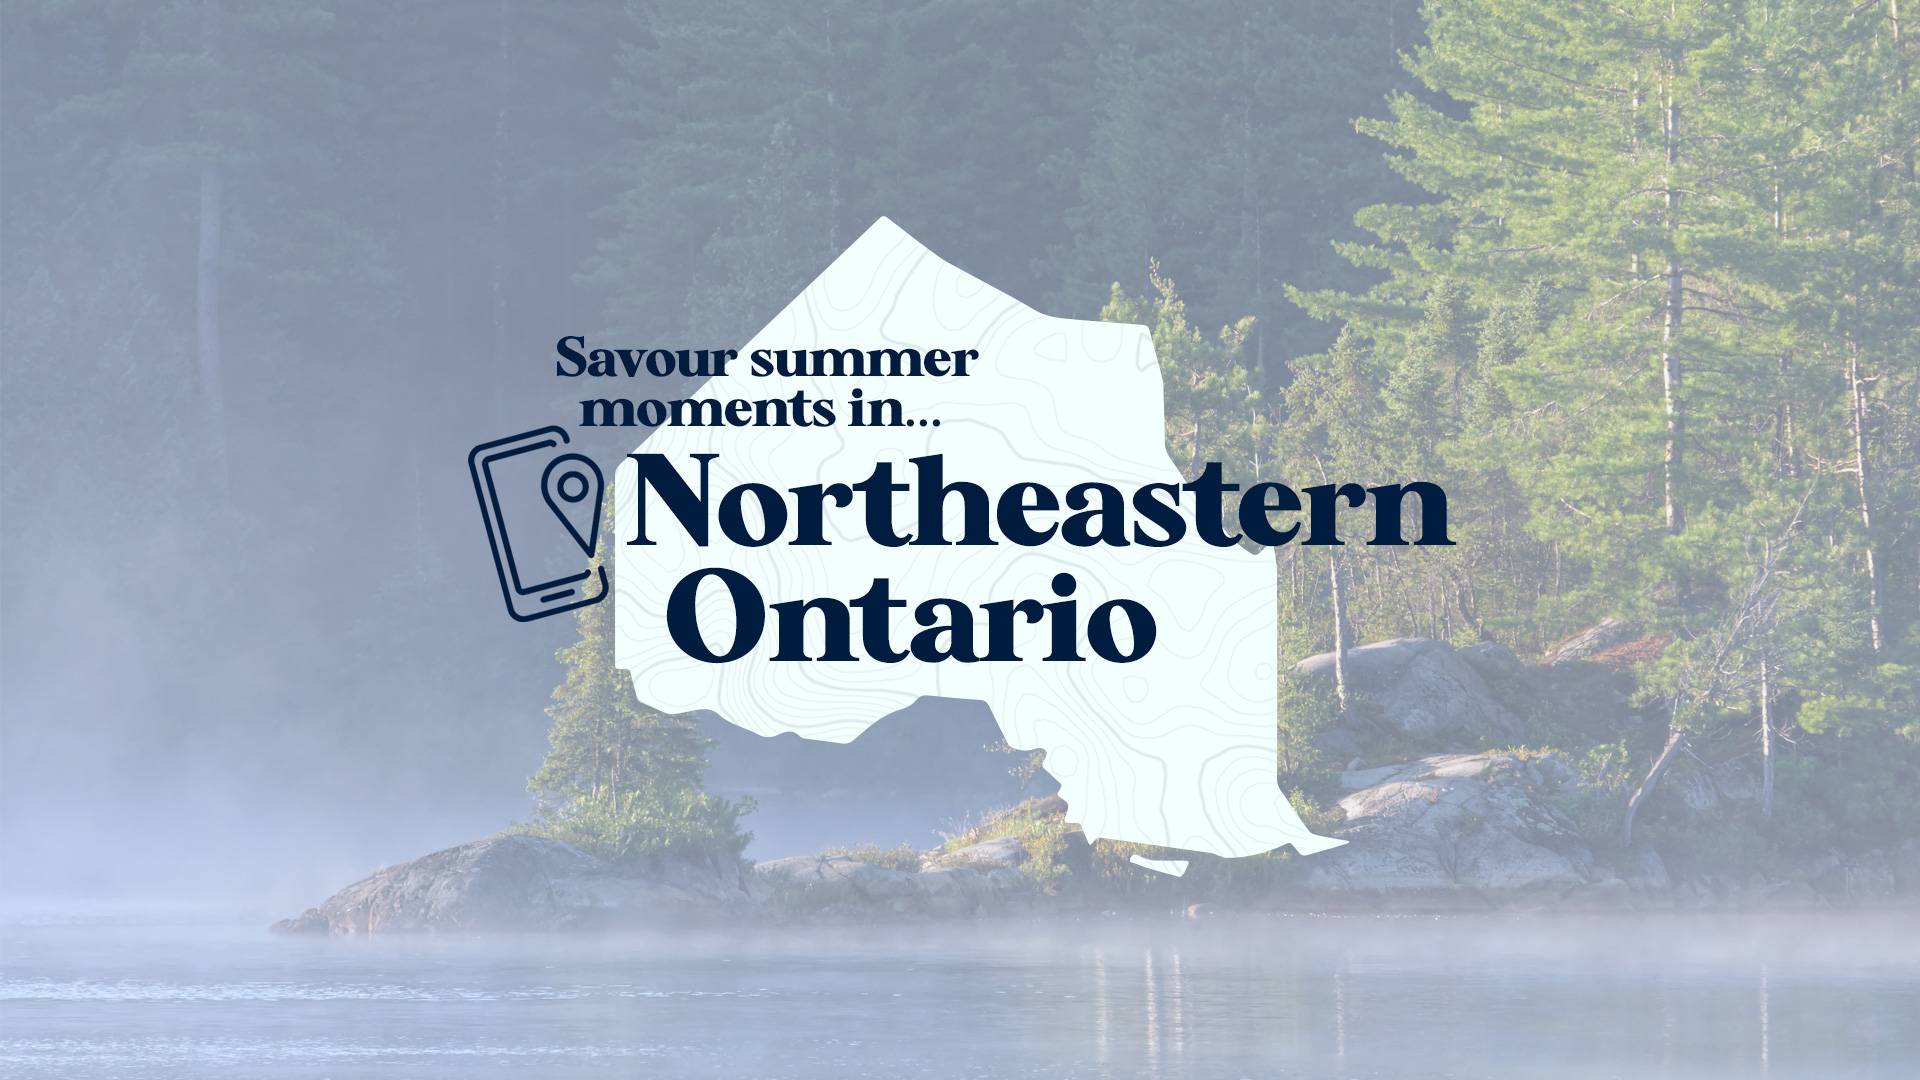 An image of a misty shoreline with the Savour Summer moments in Northeastern Ontario logo over top.